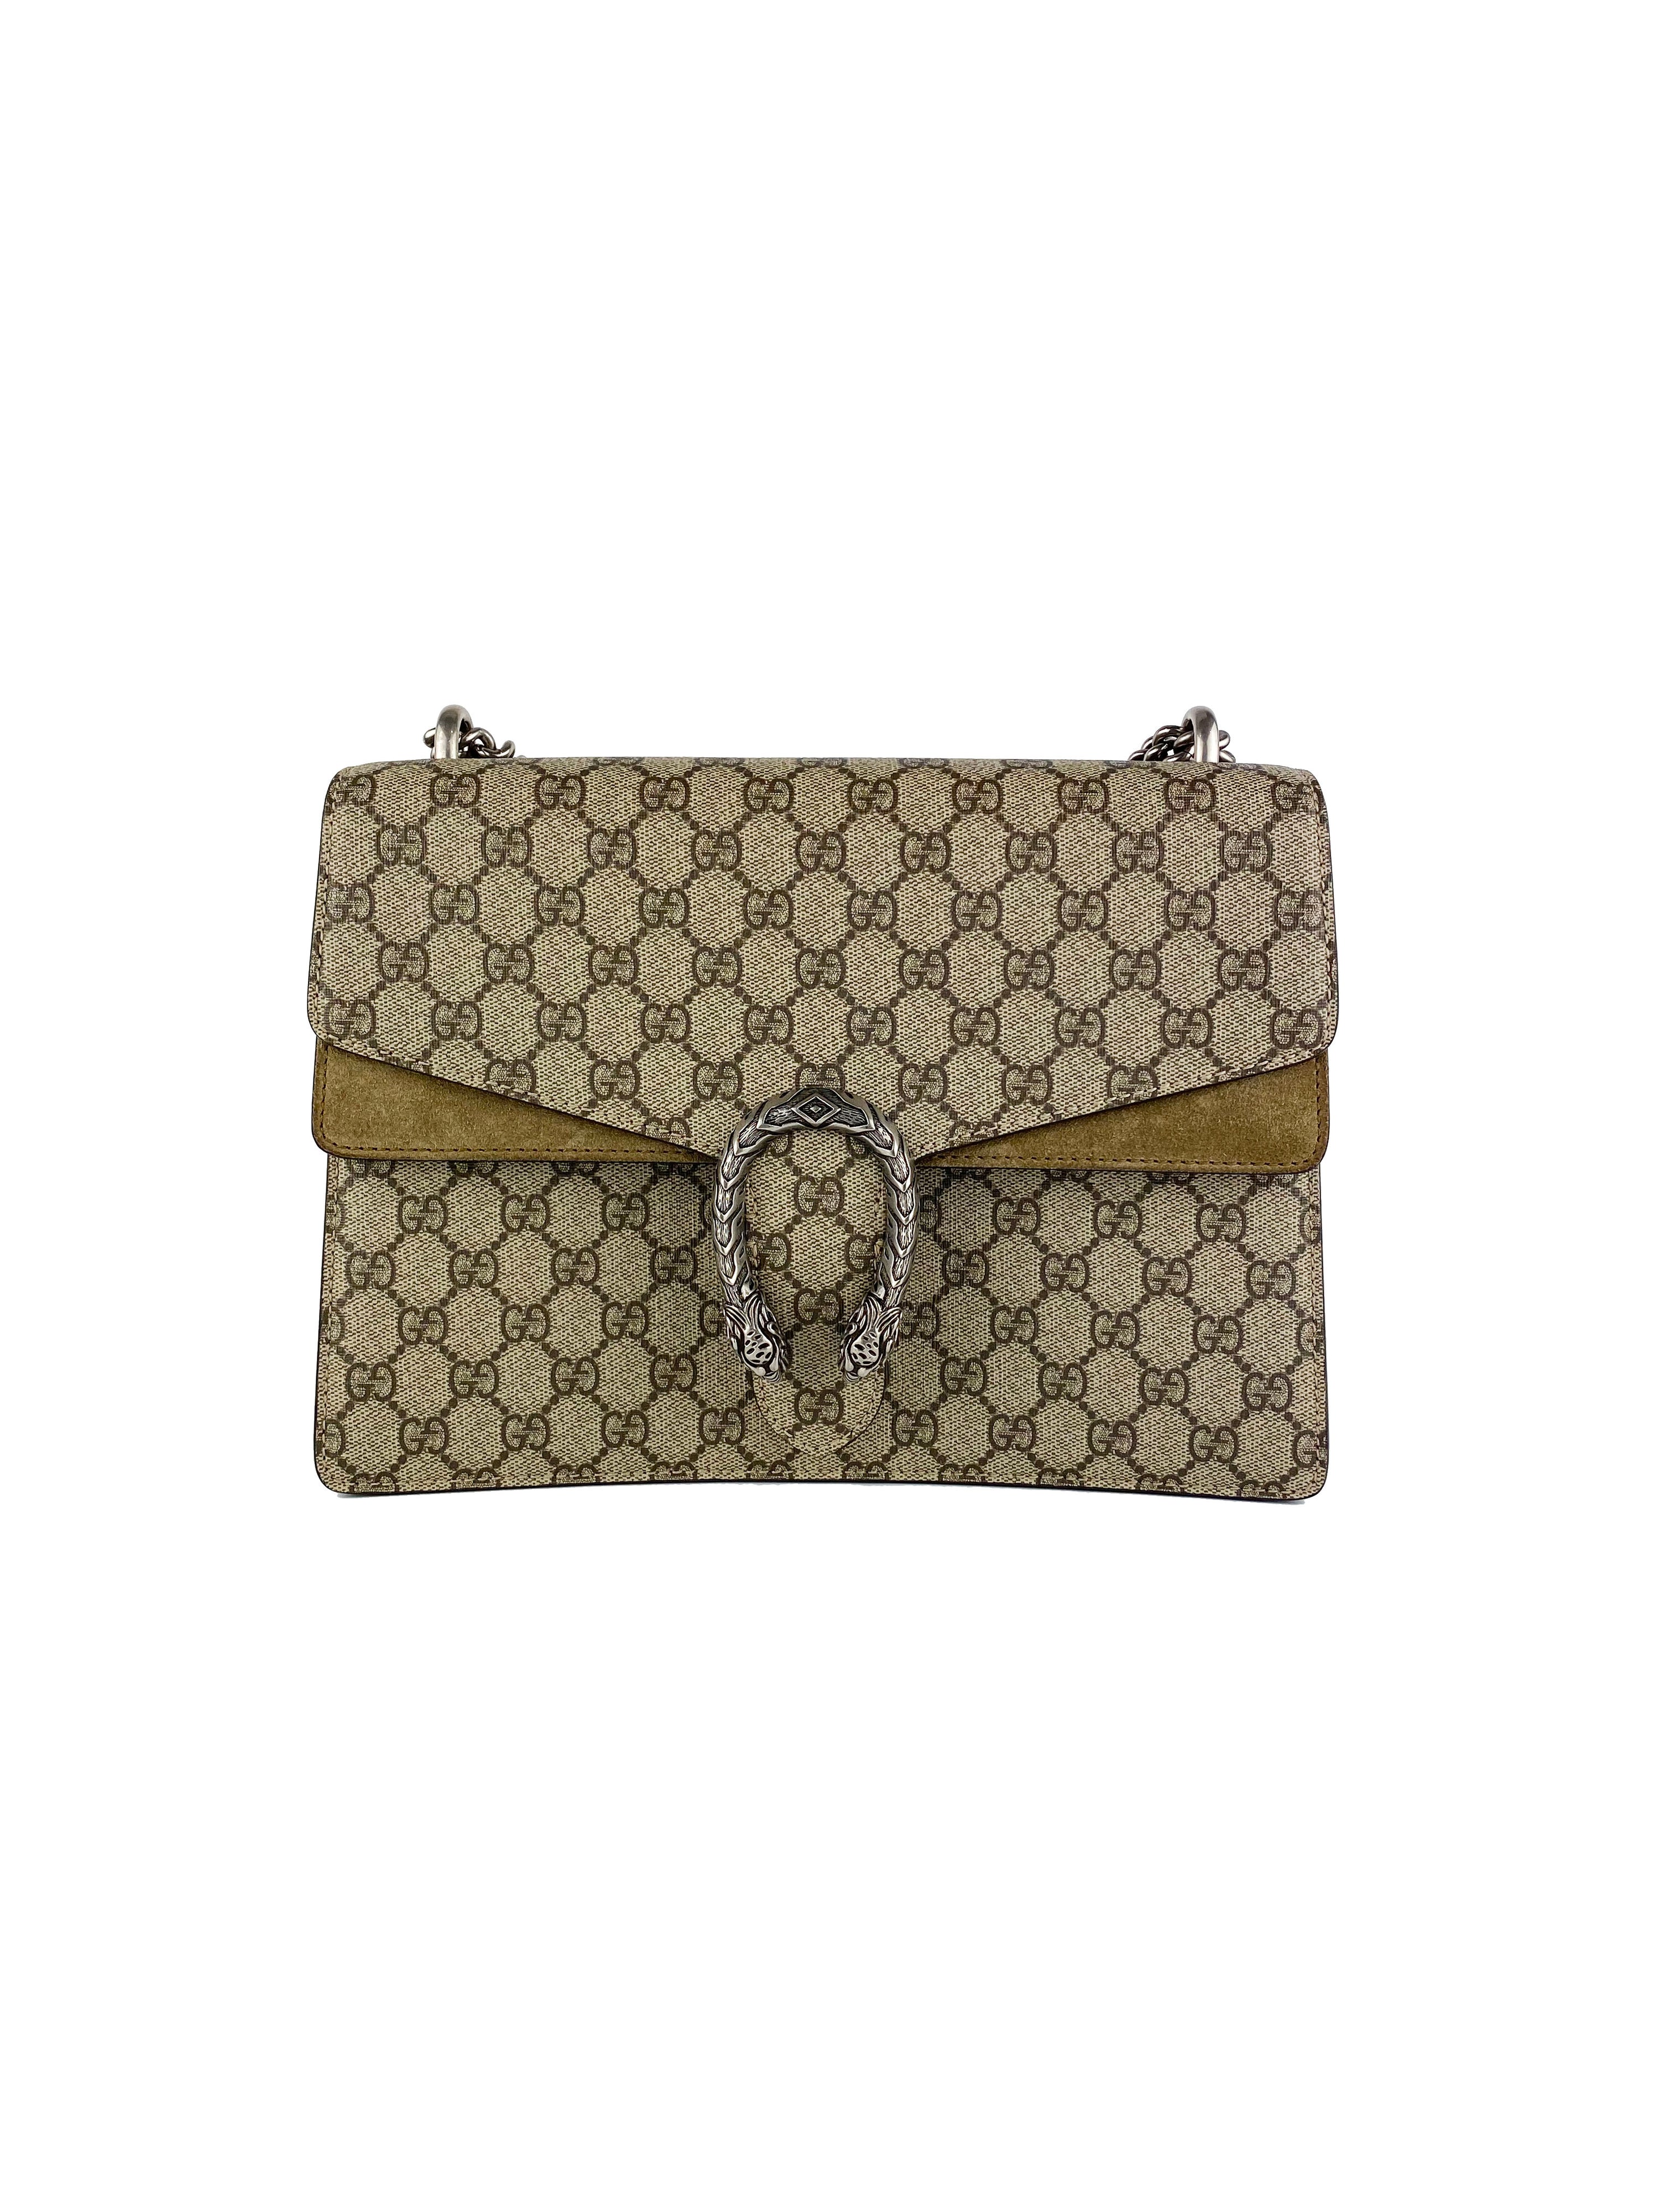 Gucci Dionysus Bag with Taupe Suede Trim